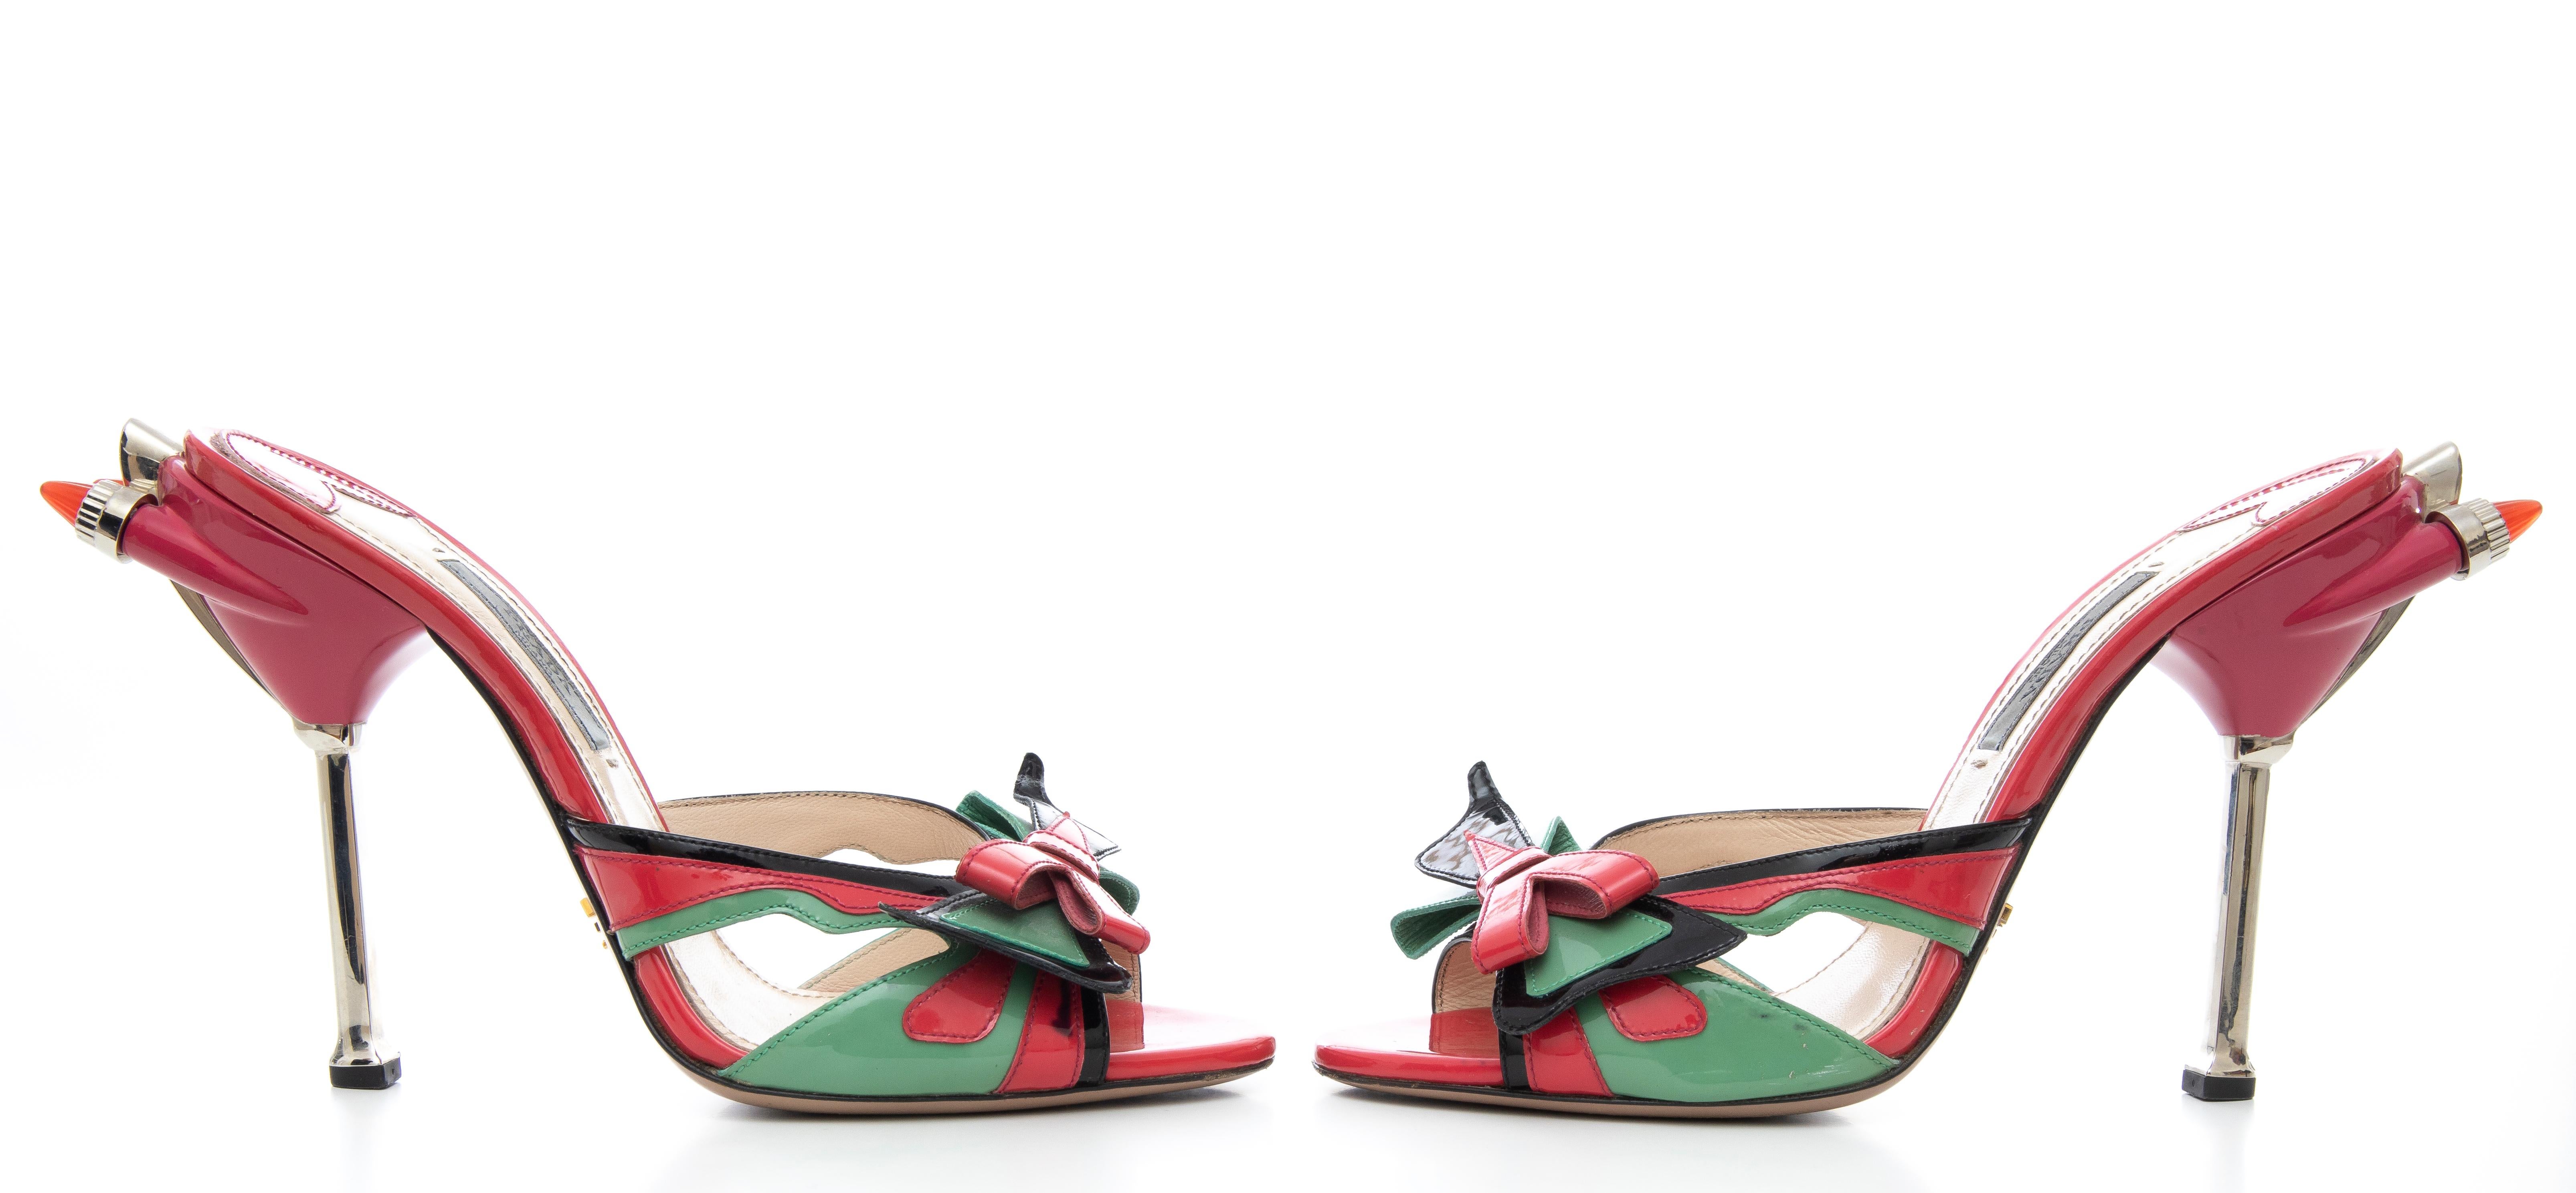 Prada Runway Patent Leather Tail Light Sandal, Spring 2012 For Sale 6